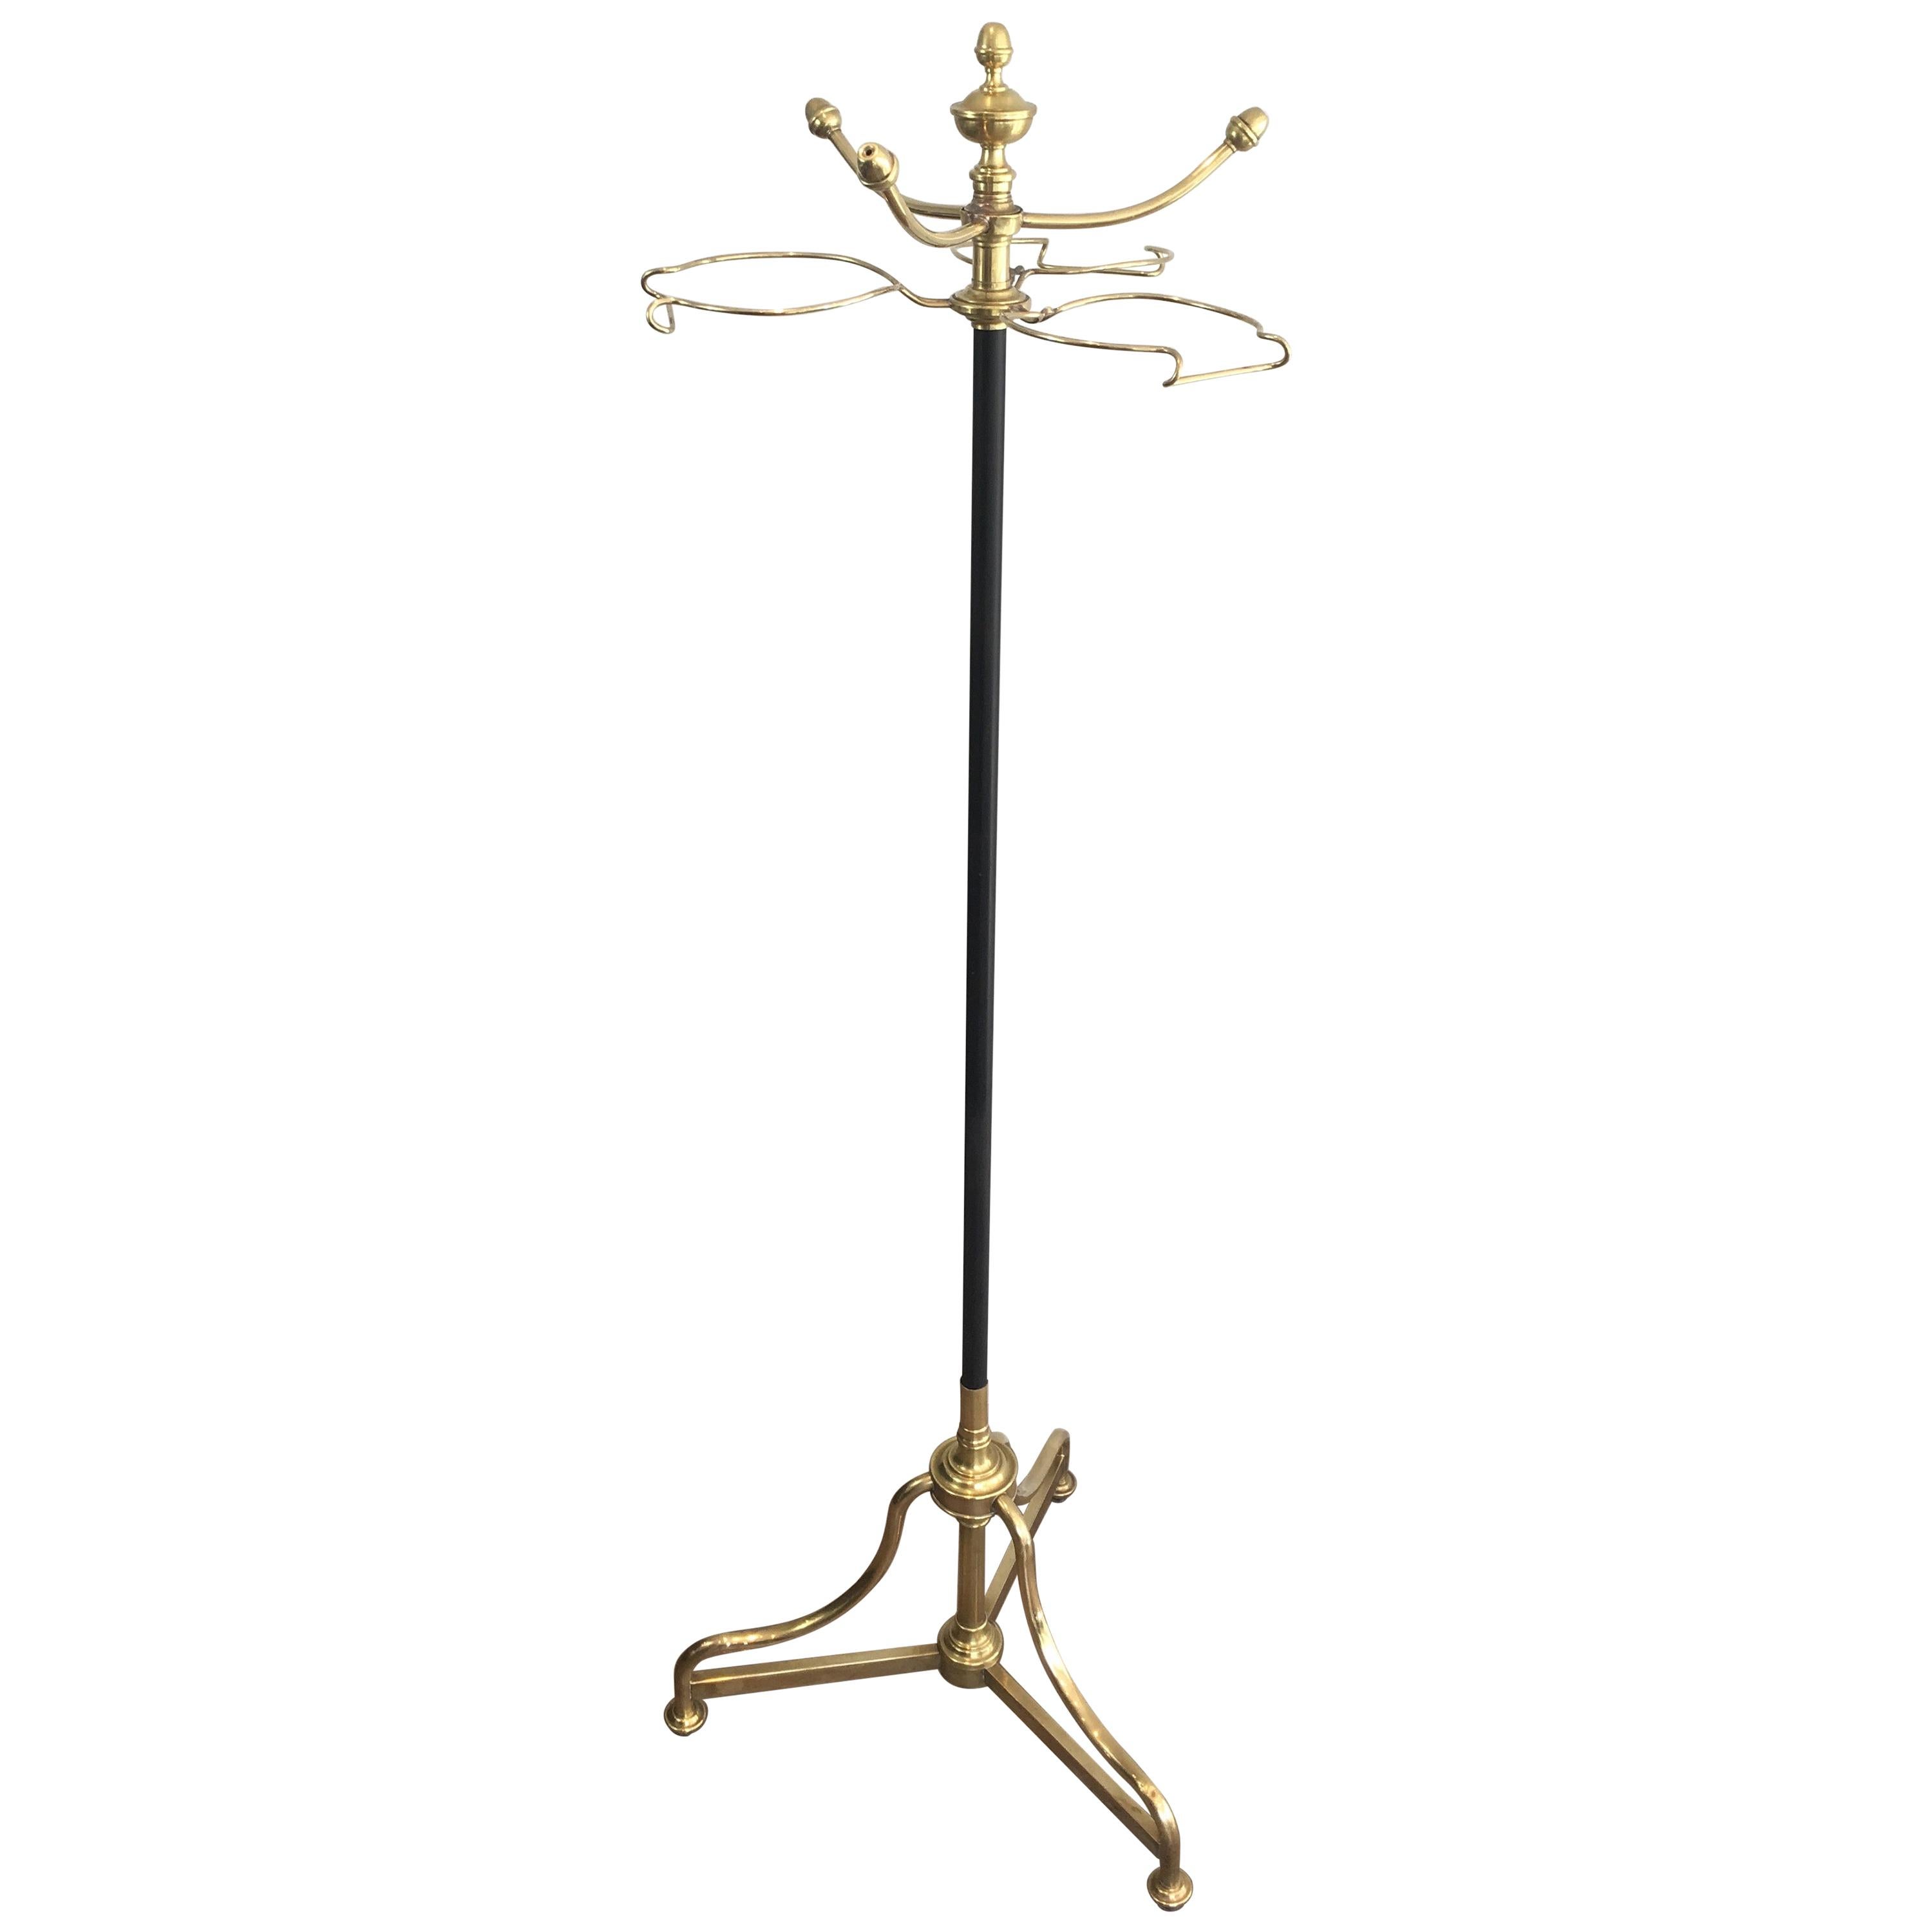 Unusual Tall Black Lacquered and Brass Coat and Hat Rack, French, circa 1900 For Sale